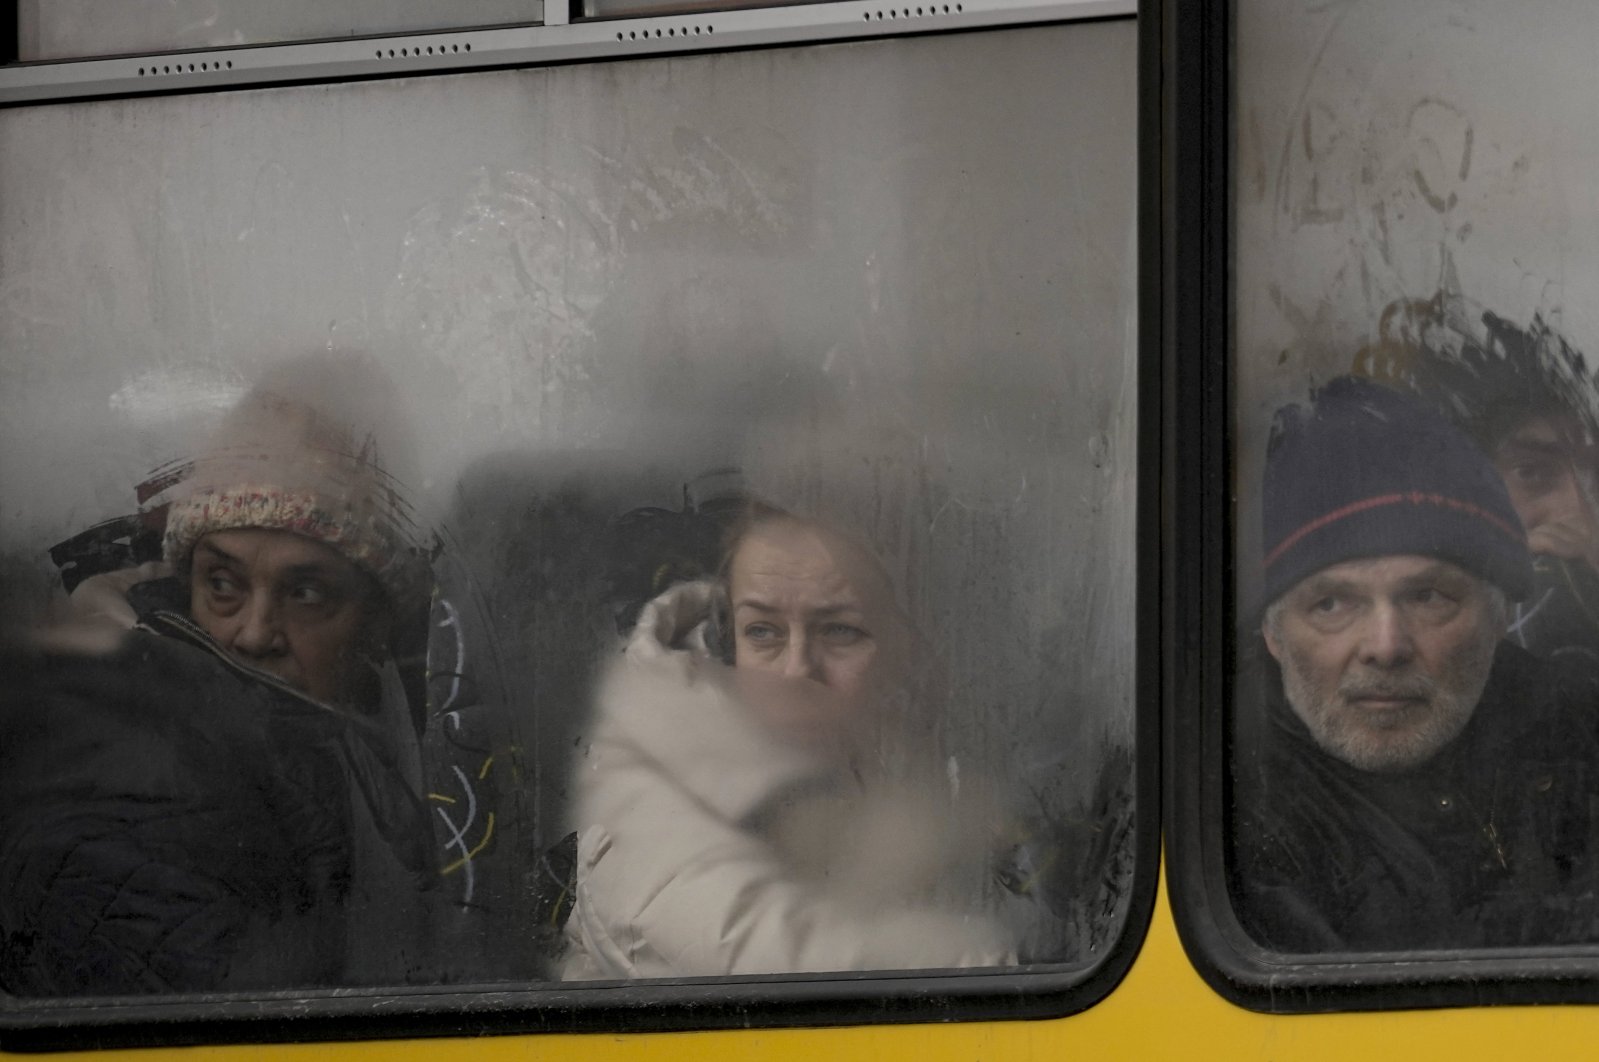 People look out a steamy bus window with drawings on it as civilians are evacuated from Irpin, on the outskirts of Kyiv, Ukraine, March 9, 2022. (AP Photo)